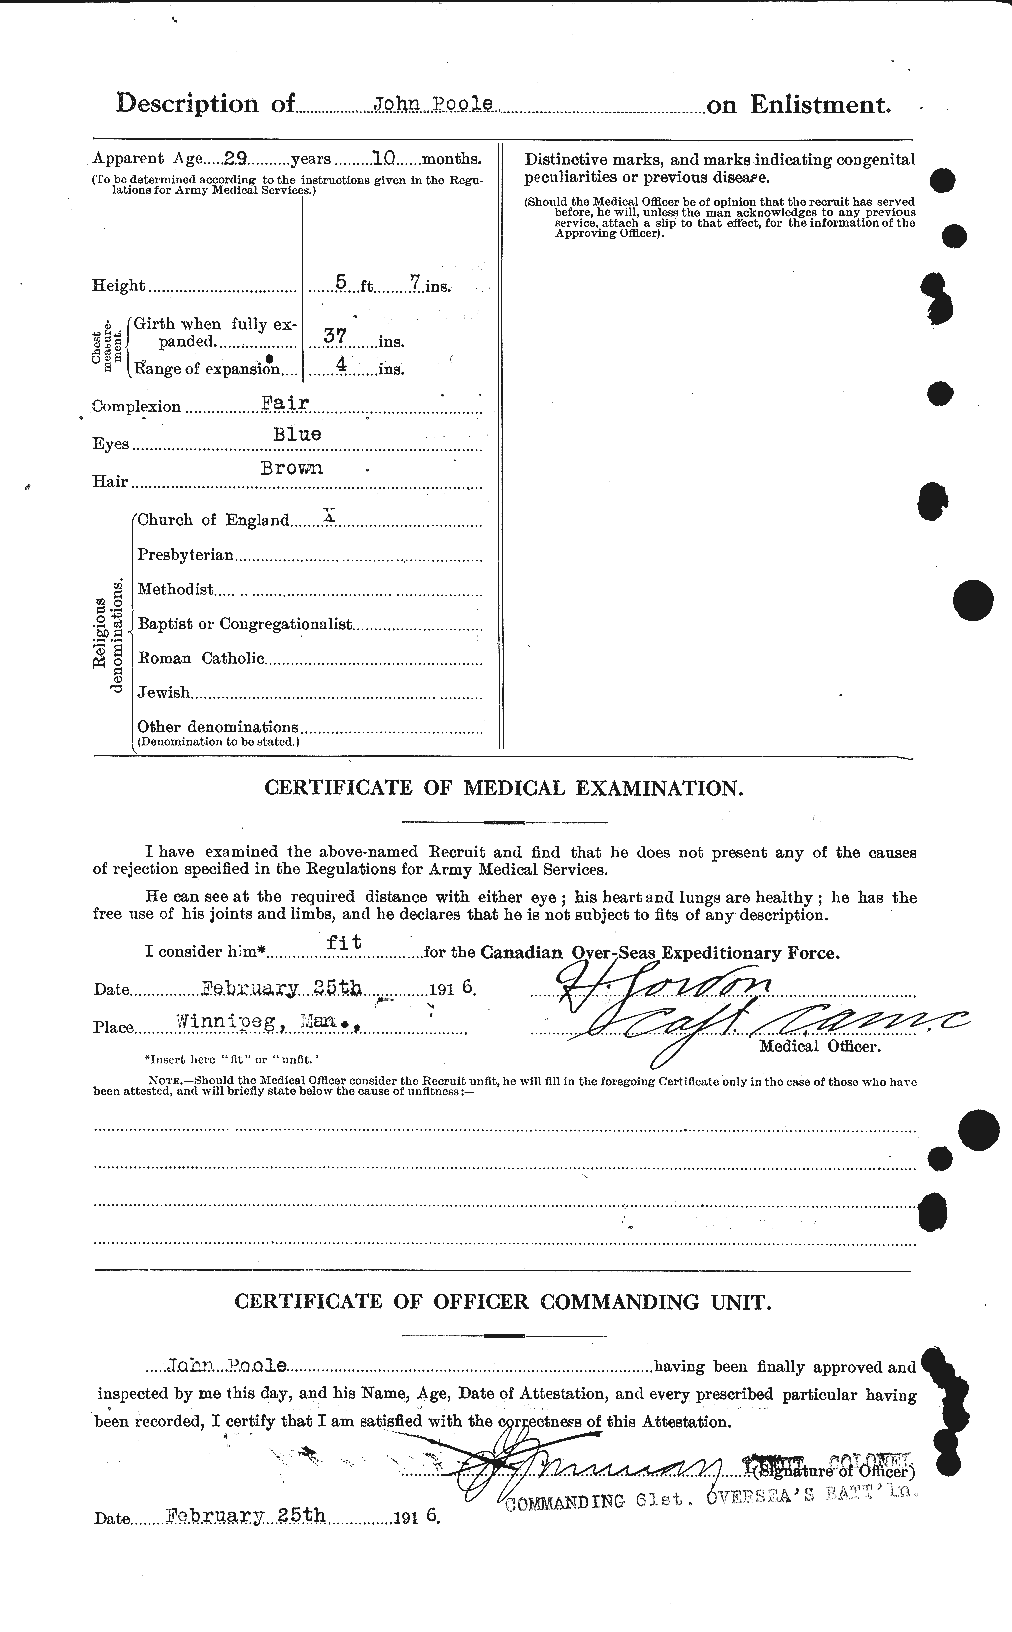 Personnel Records of the First World War - CEF 581890b